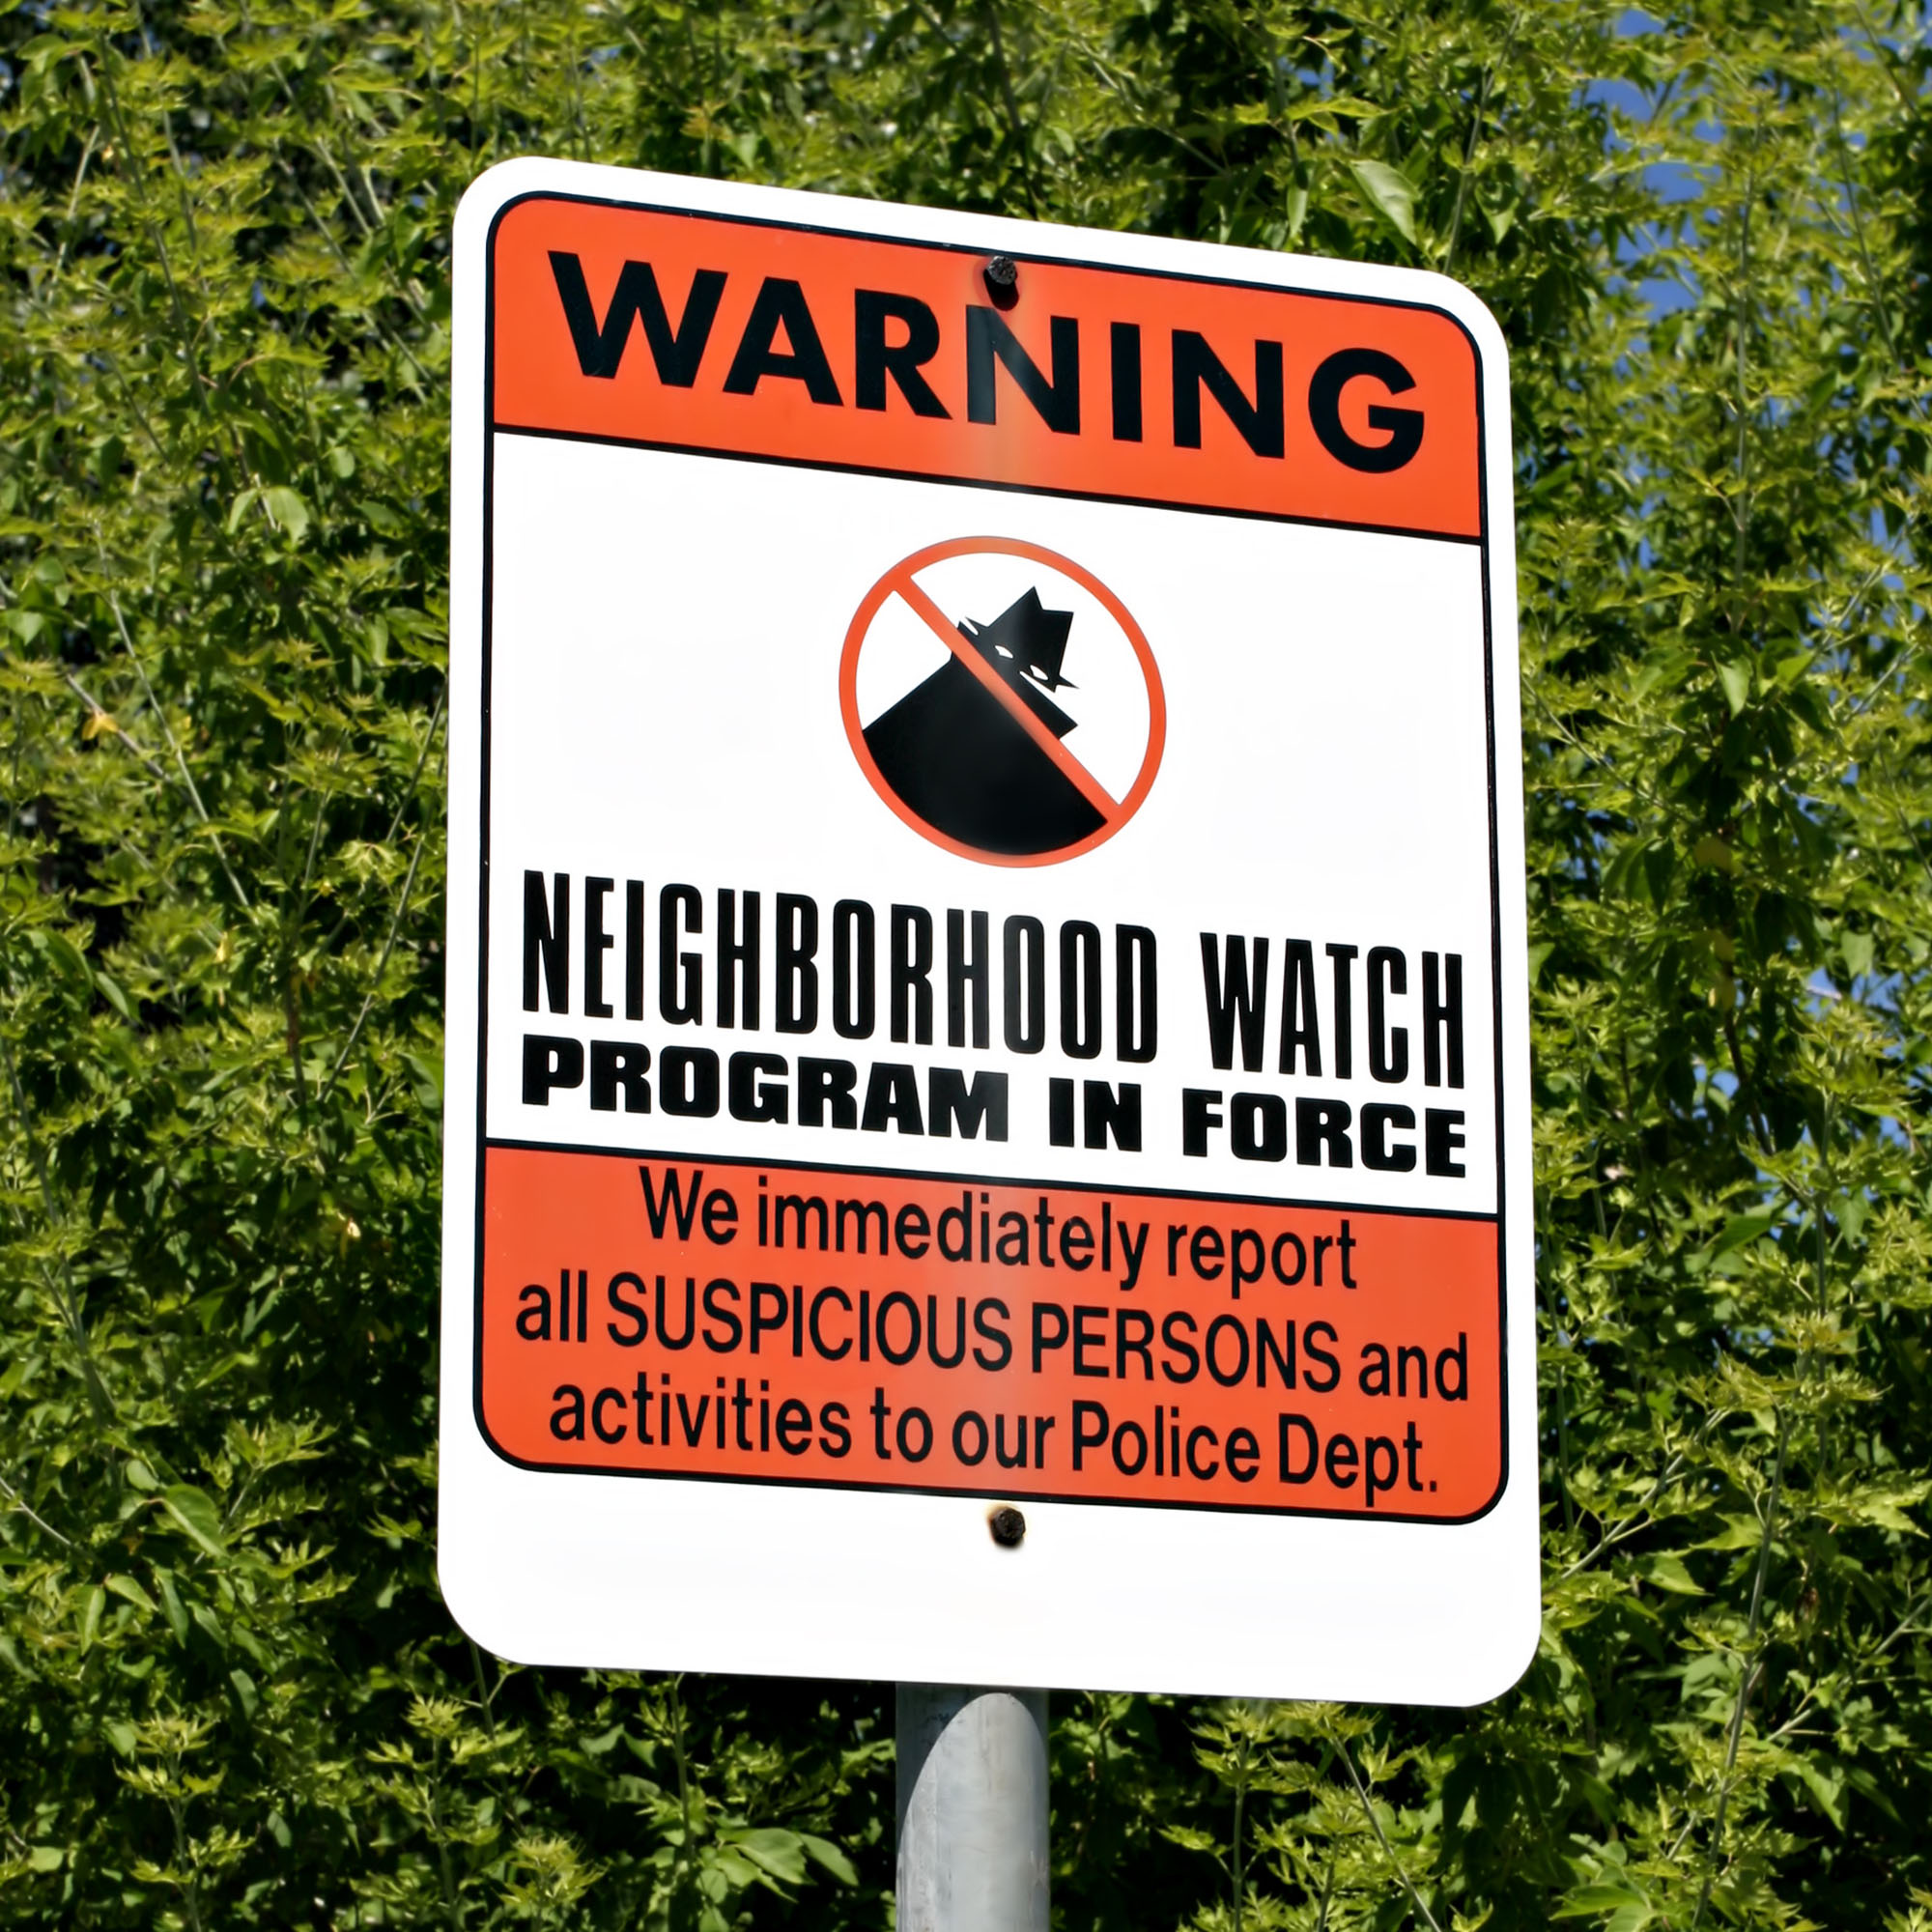 What are the benefits of neighborhood watch?